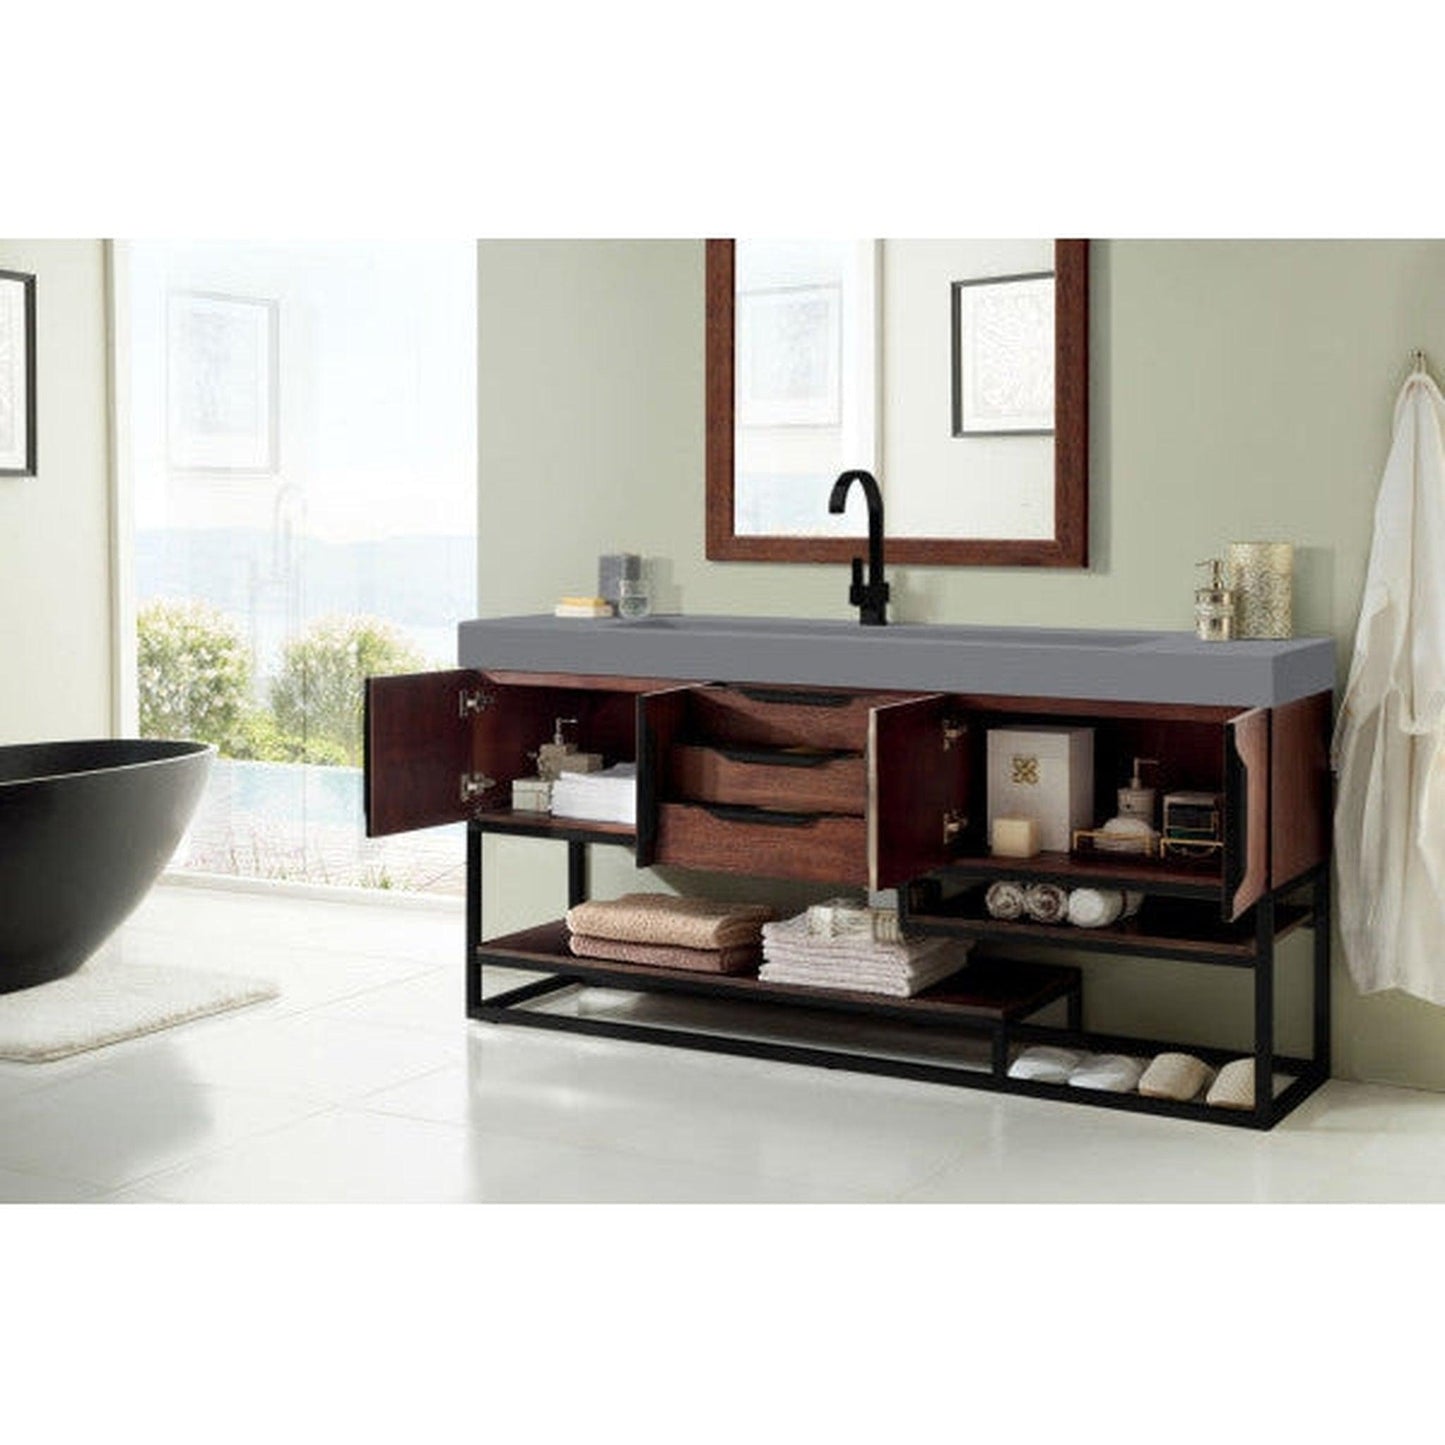 James Martin Columbia 73" Single Coffee Oak Bathroom Vanity With Matte Black Hardware and 6" Glossy Dusk Gray Composite Countertop